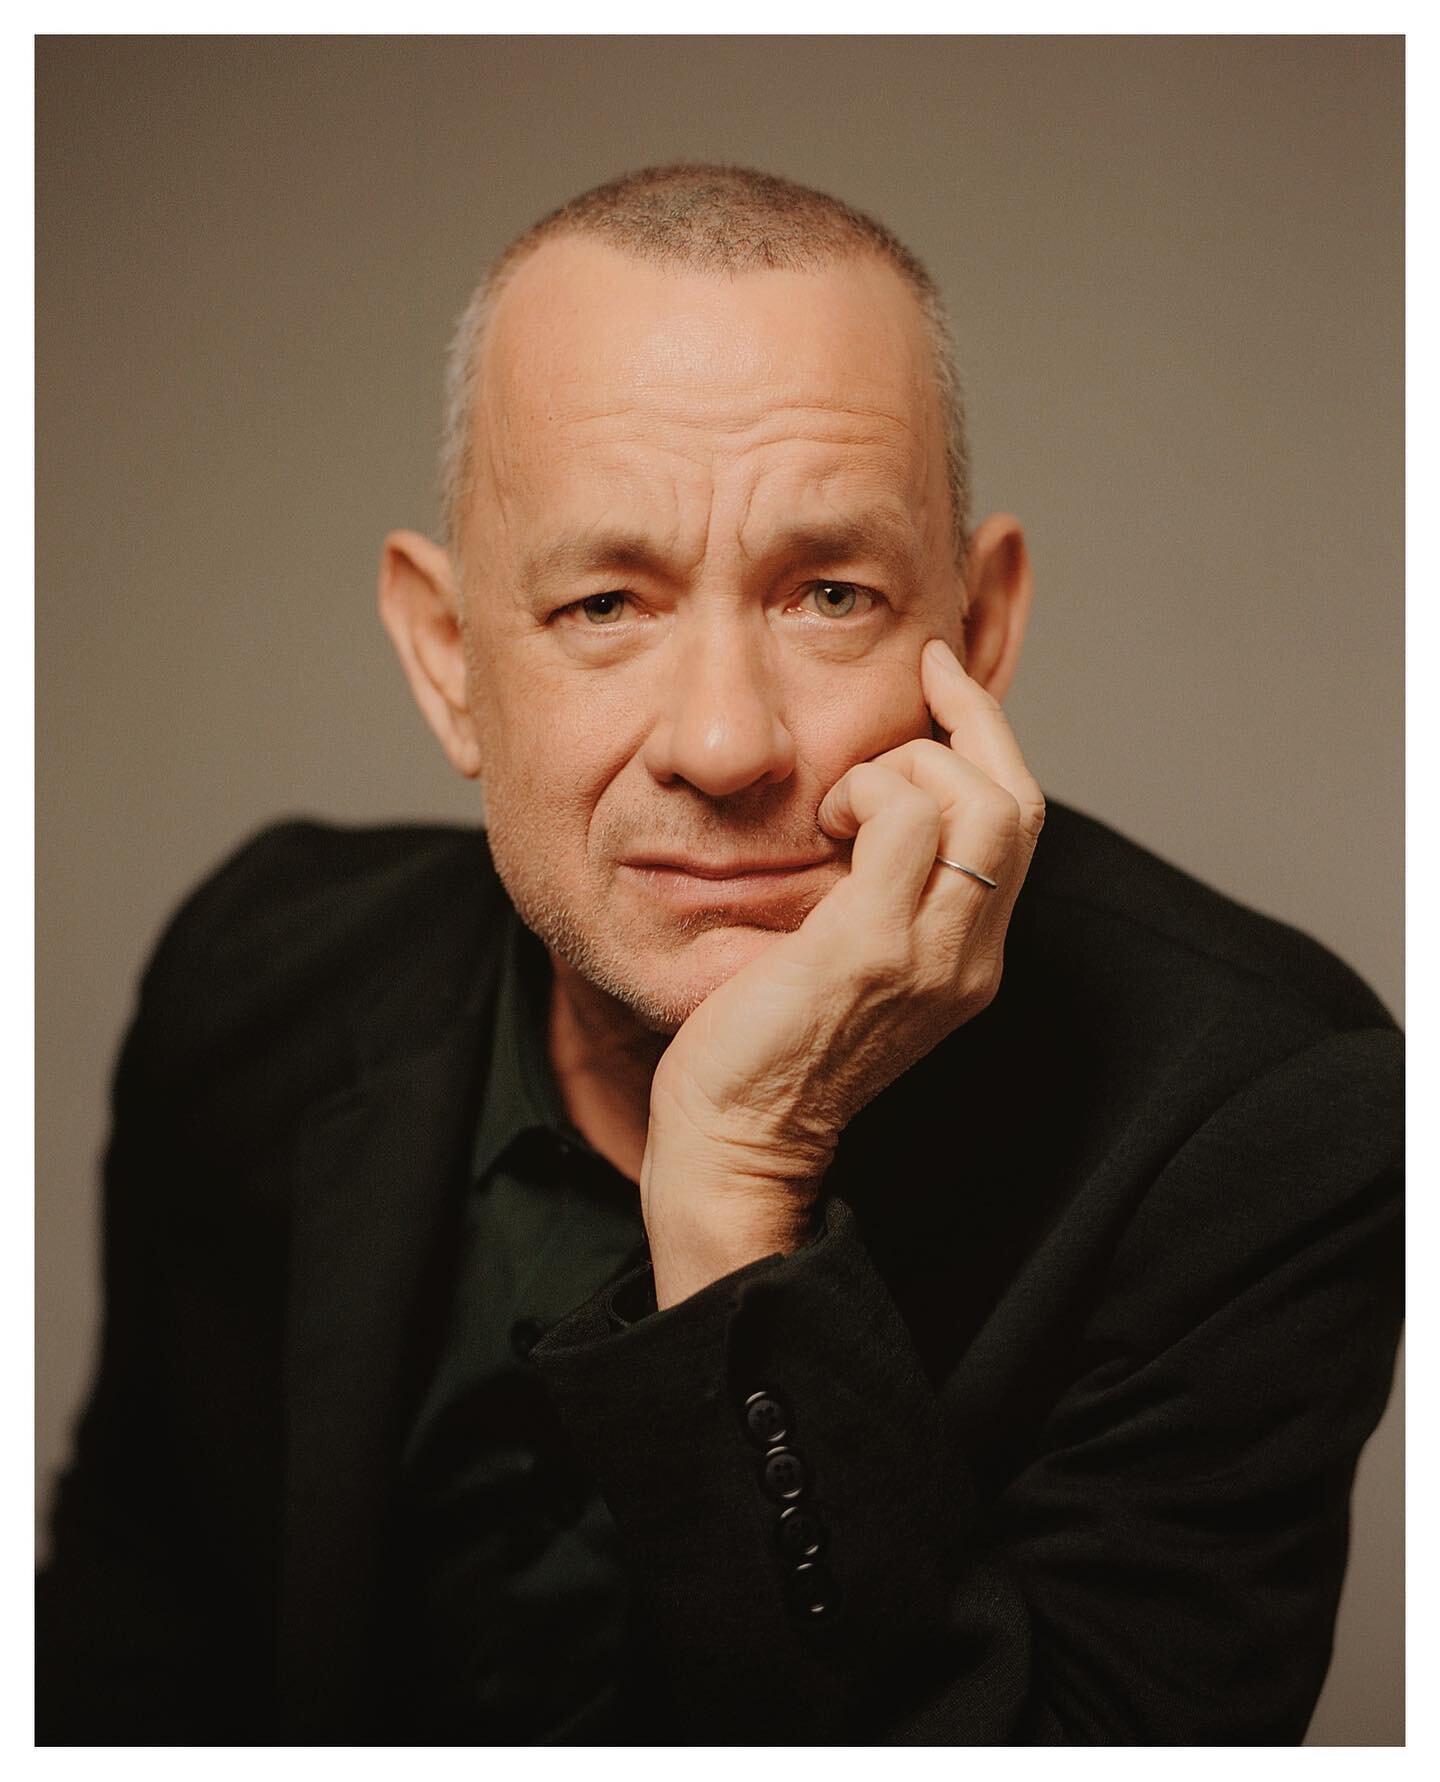 Tom Hanks for @theatlantic. 

Thank you @luisestauss for the assignment ✨